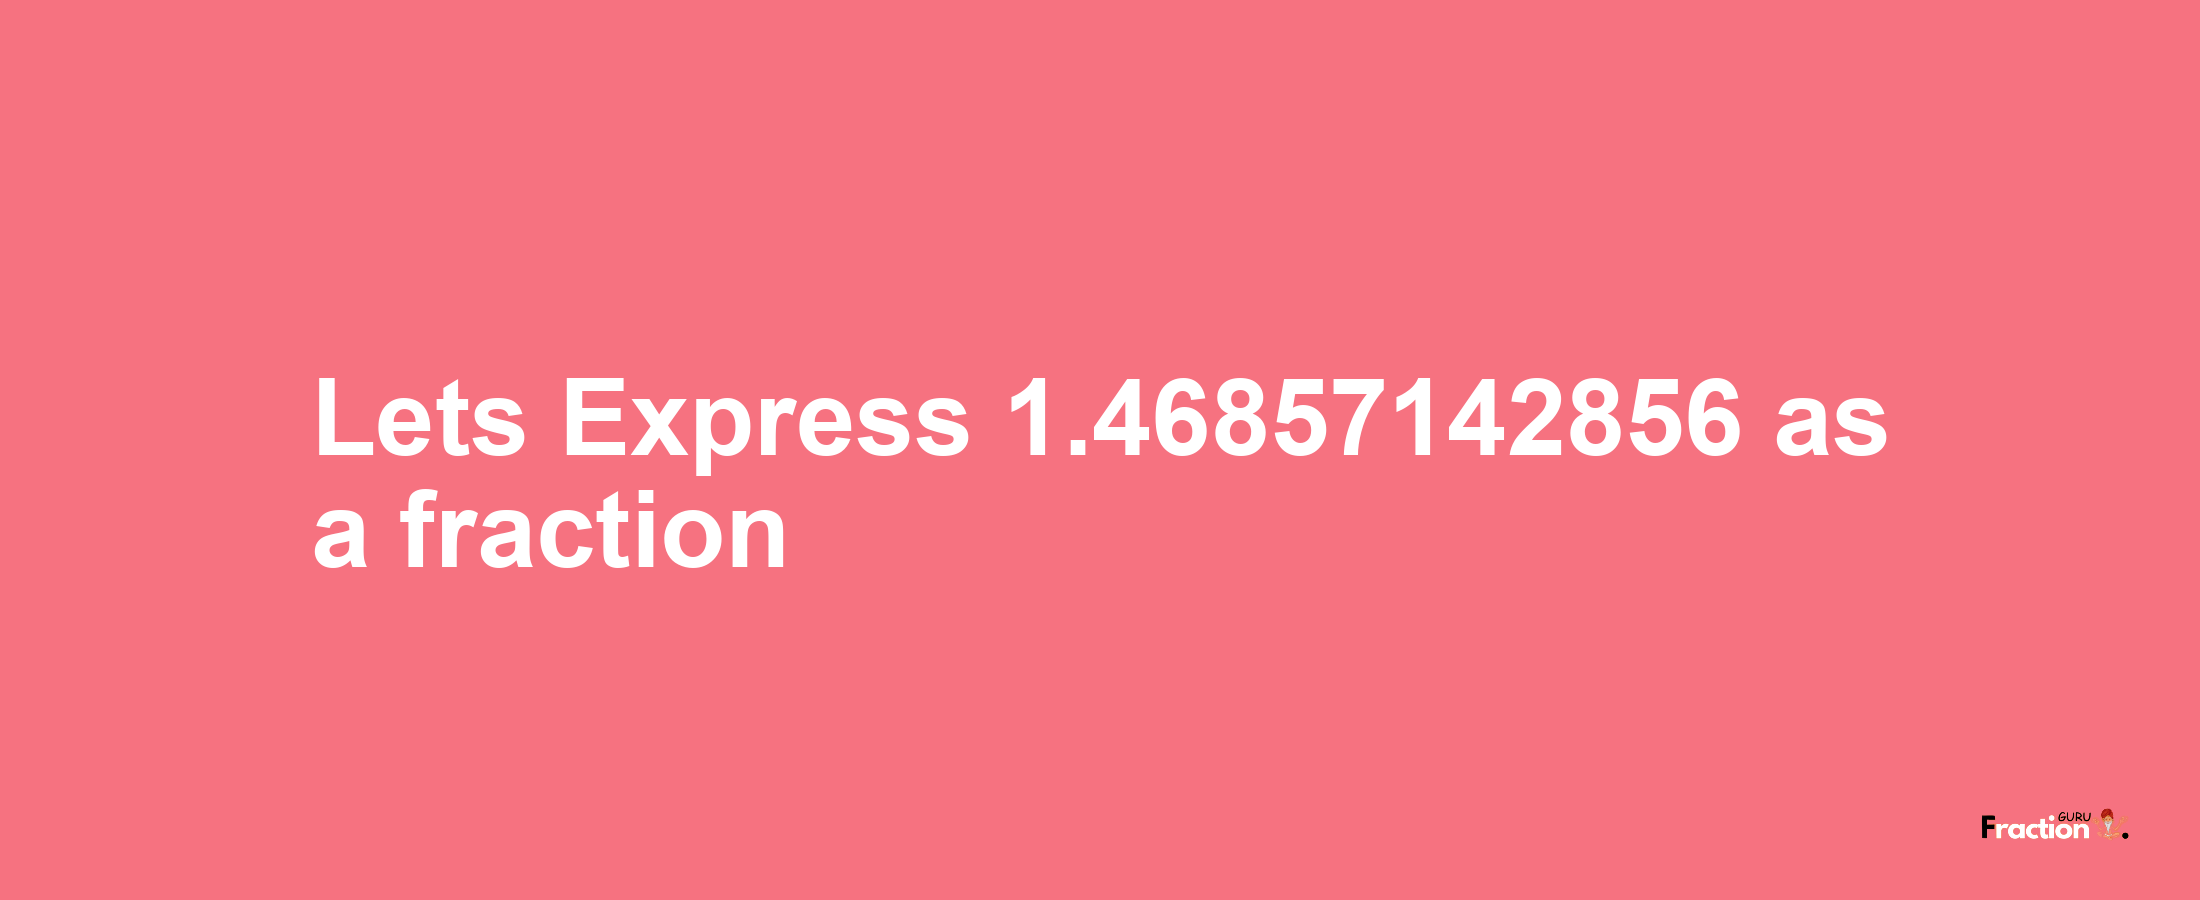 Lets Express 1.46857142856 as afraction